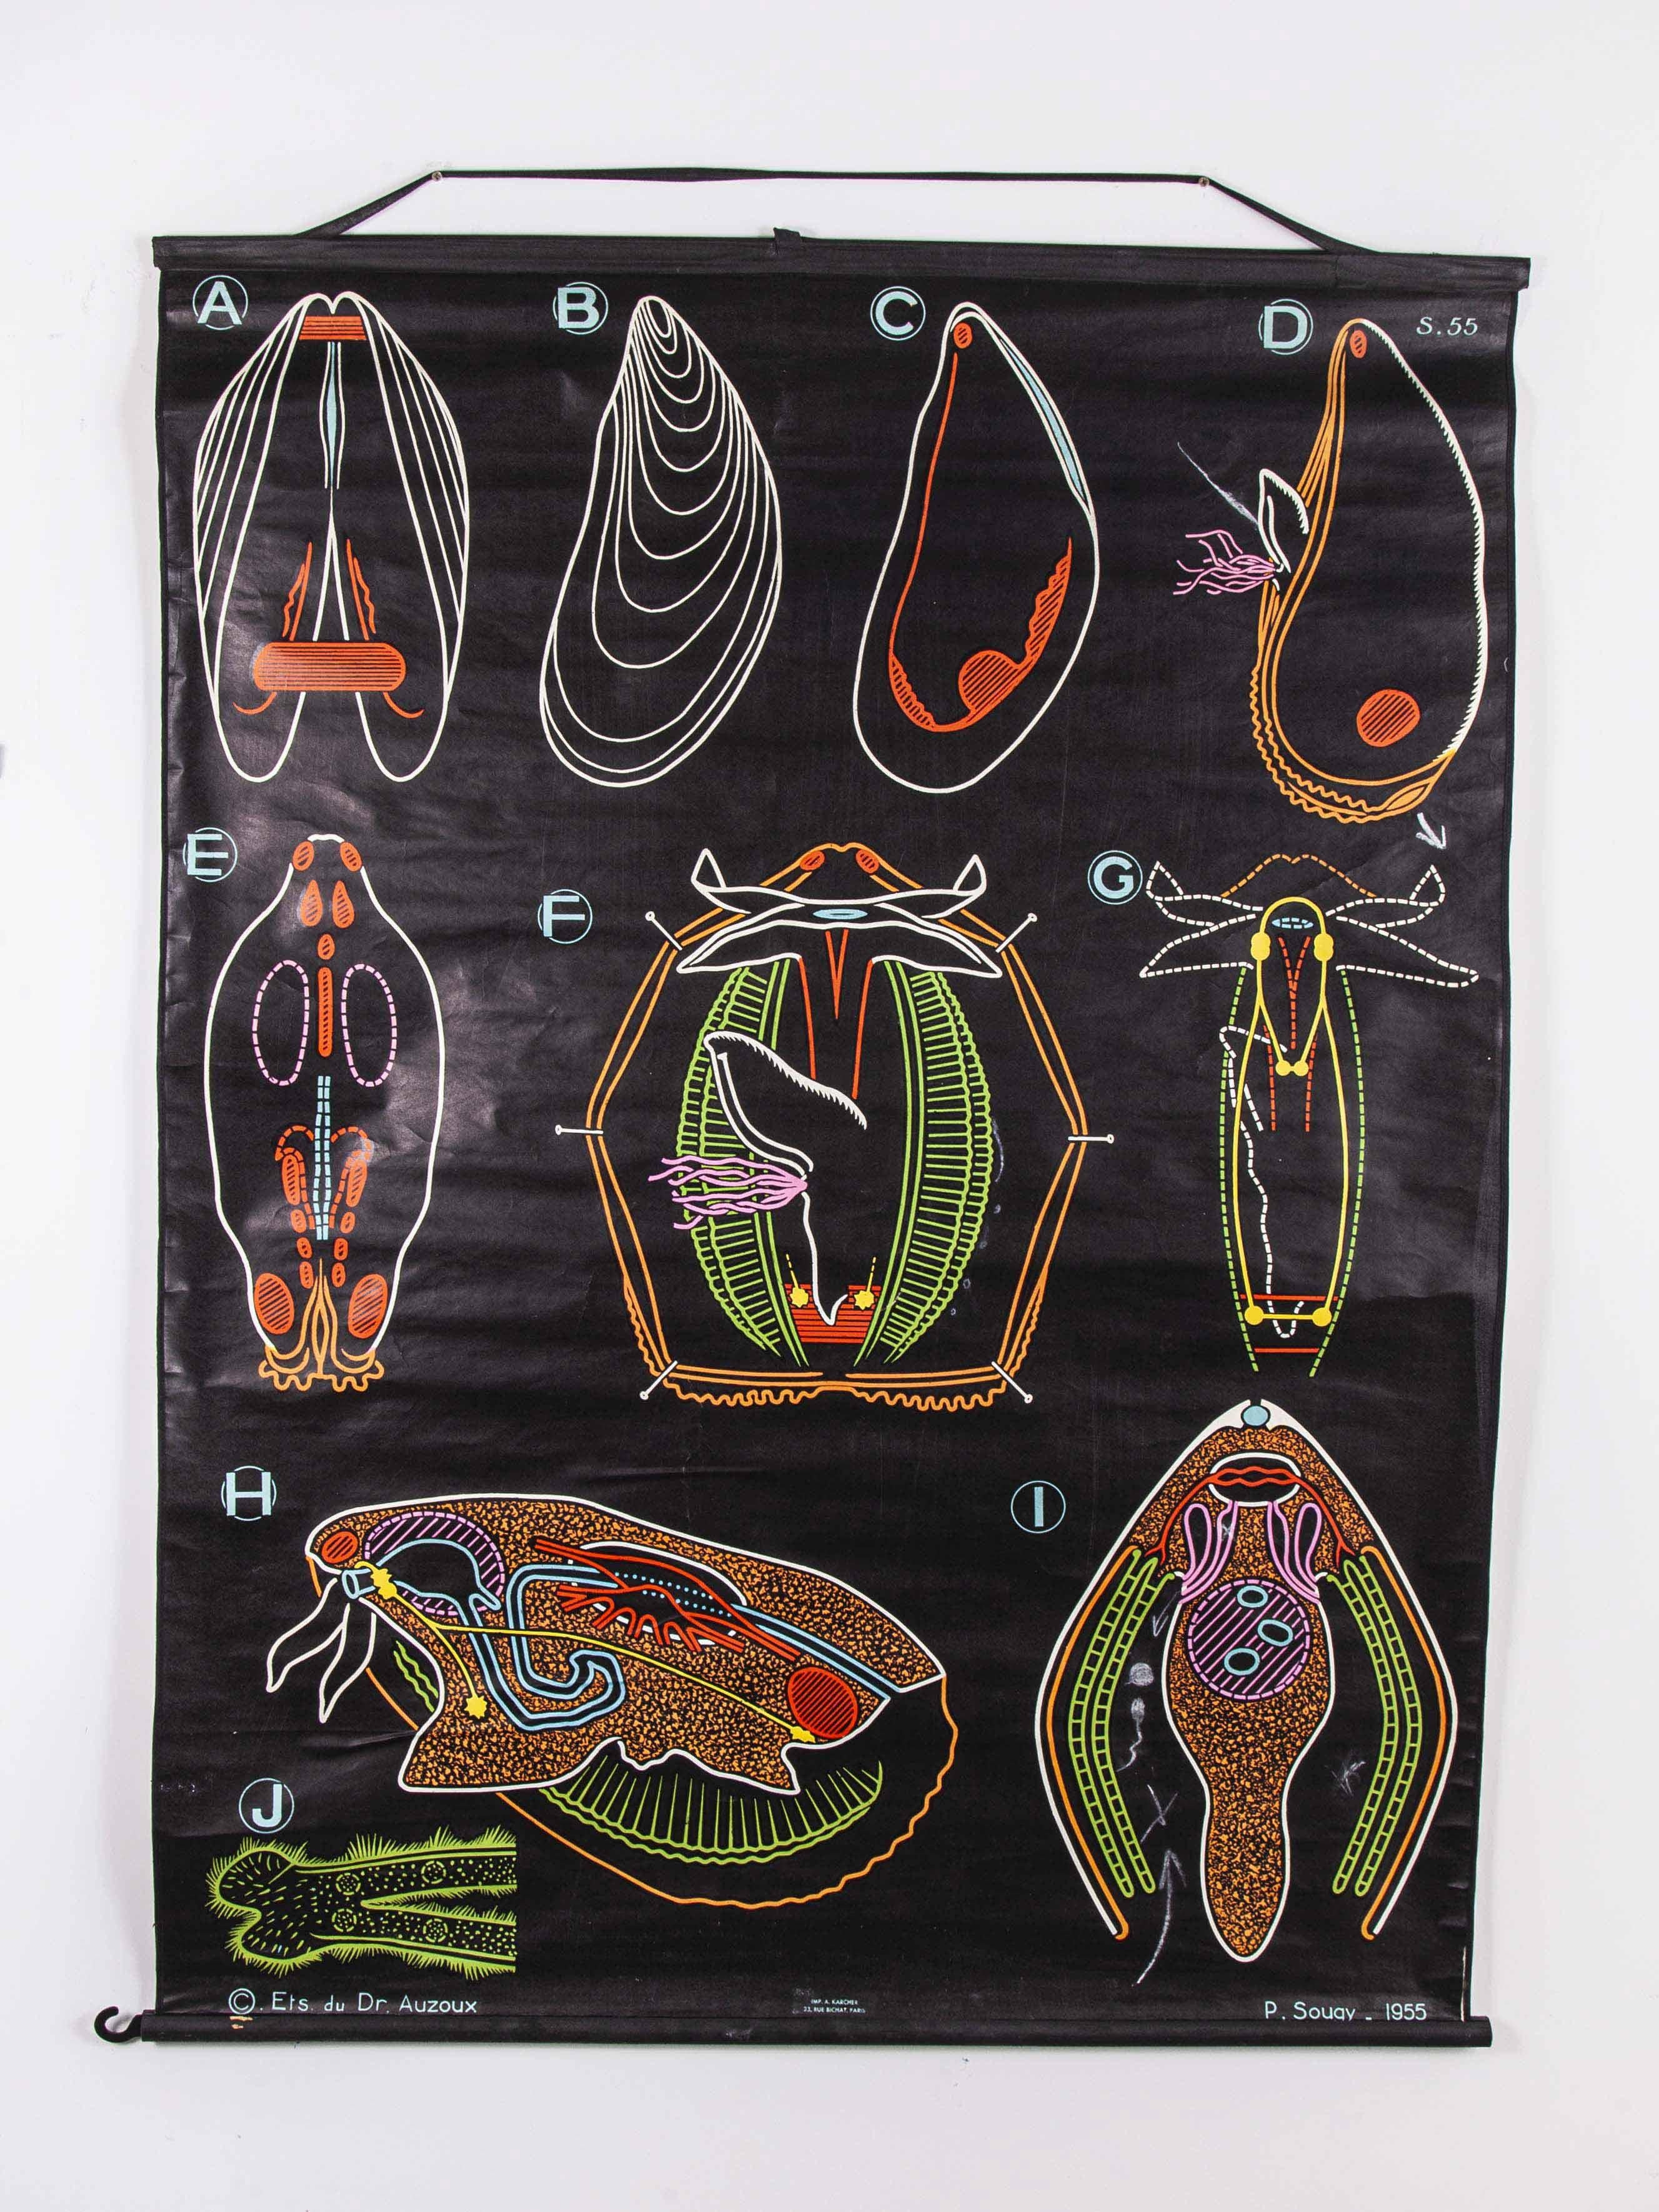 1955 Dr Auzoux French educational chart – P.Sougy – La Moule (Mussel) S55
1955 Dr Auzoux French educational chart – P.Sougy – La Moule (Mussel) S55. In the 1940s Paul Sougy, a gifted illustrator and curator of natural history at the Orleans Science